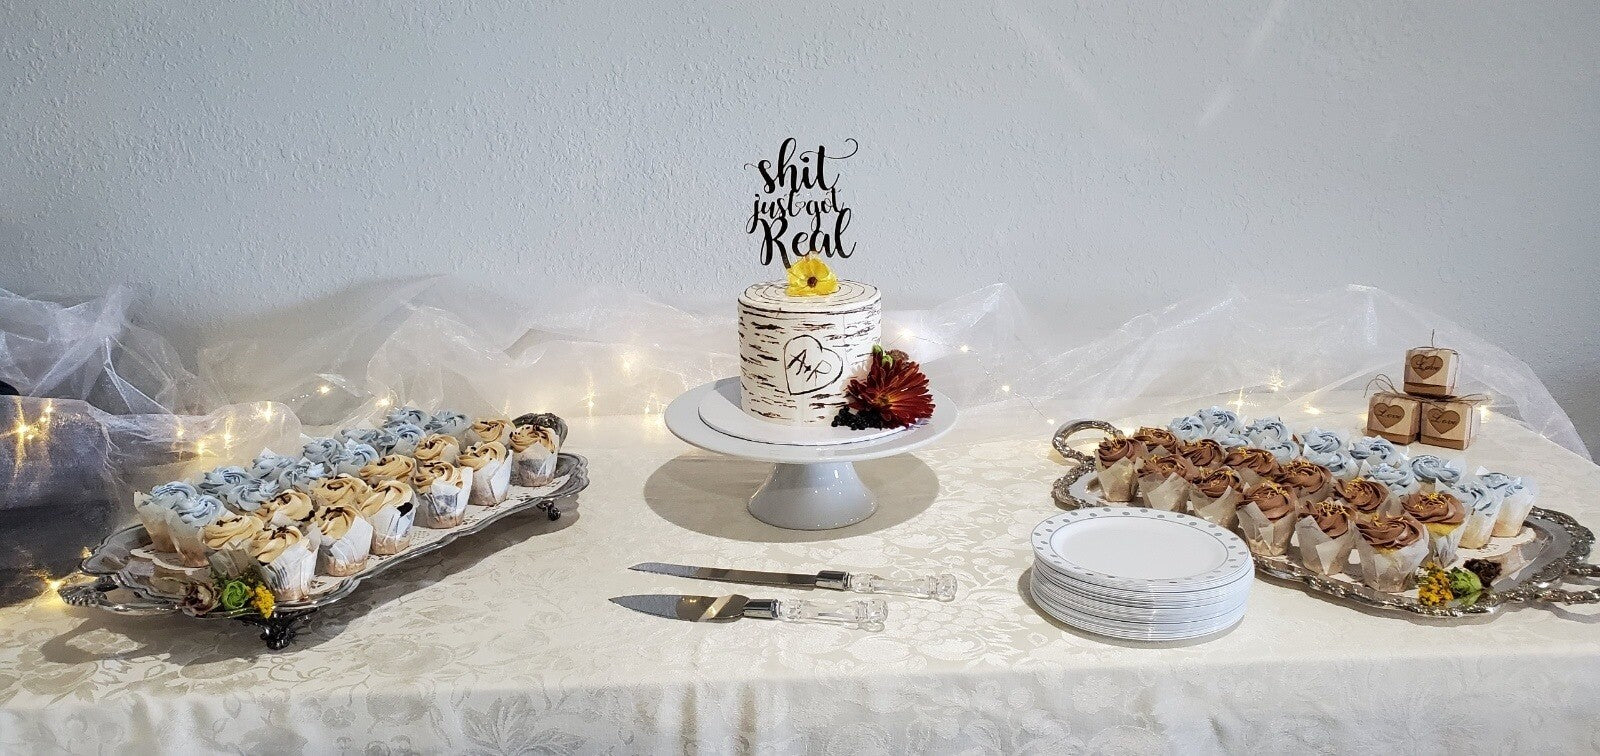 funny wedding cake topper that says shit just got real.